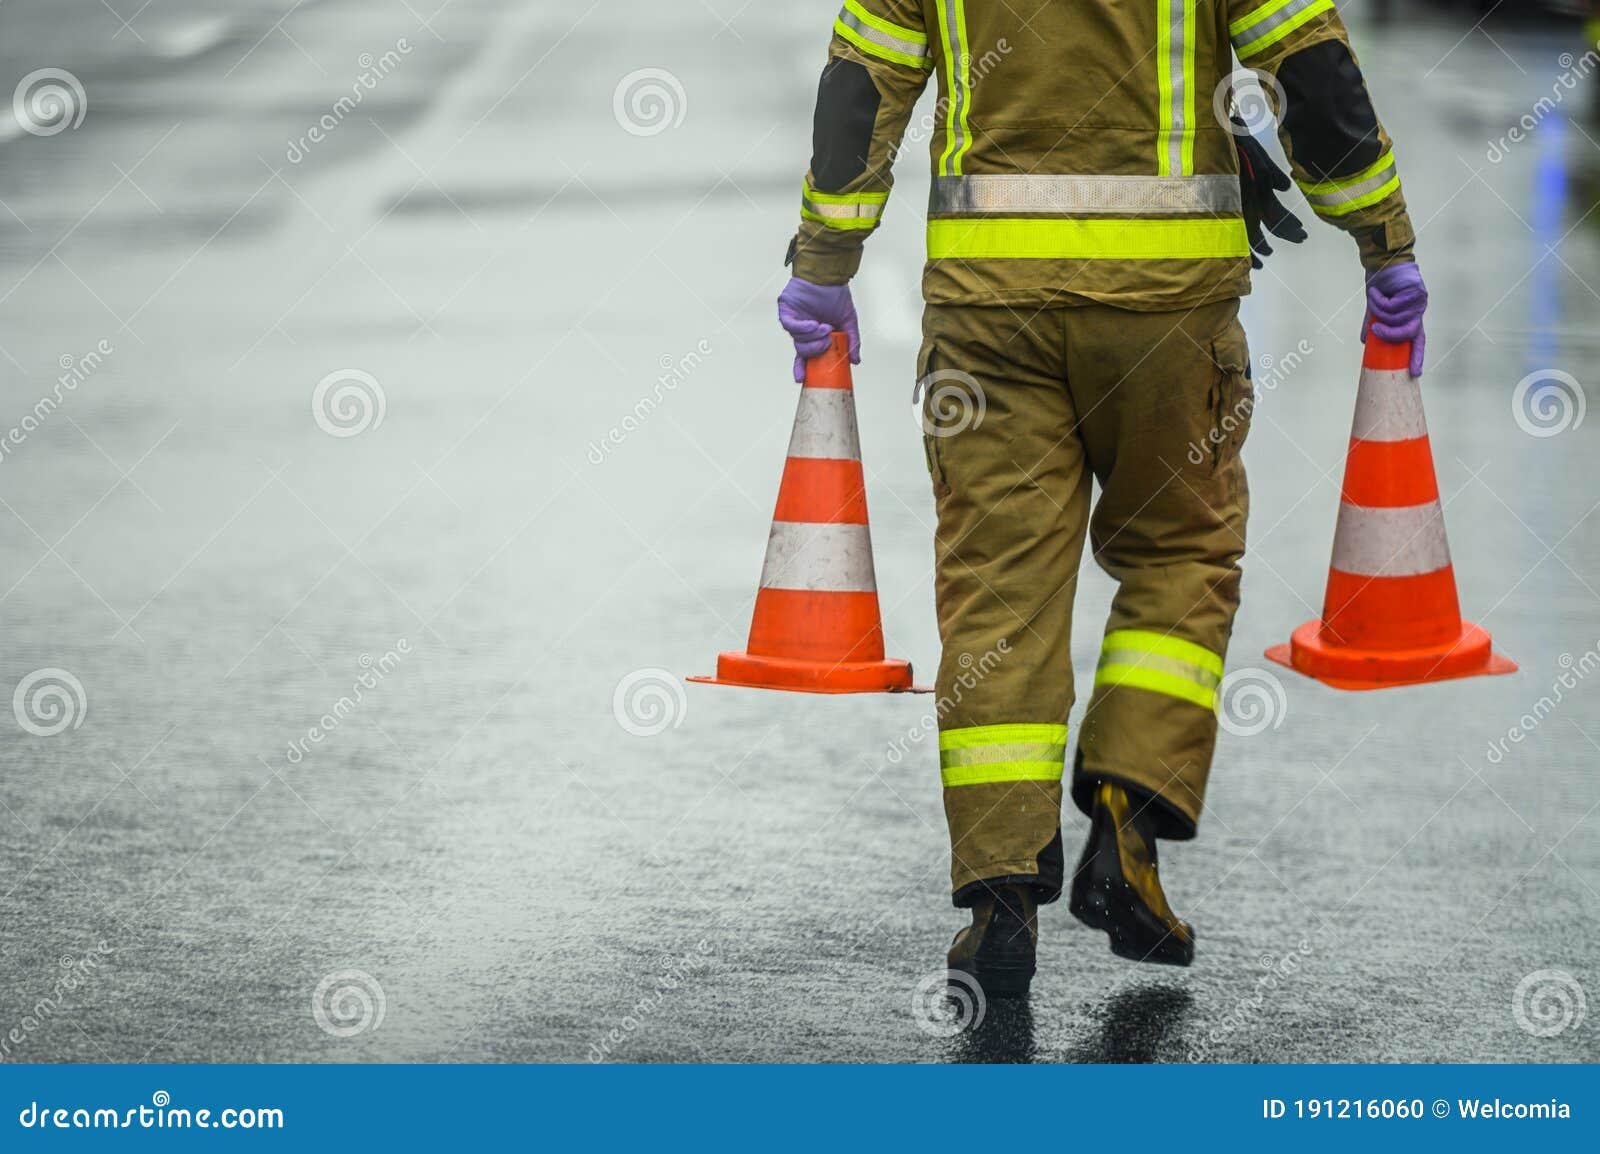 highway worker preparing for road closure moving two traffic cones